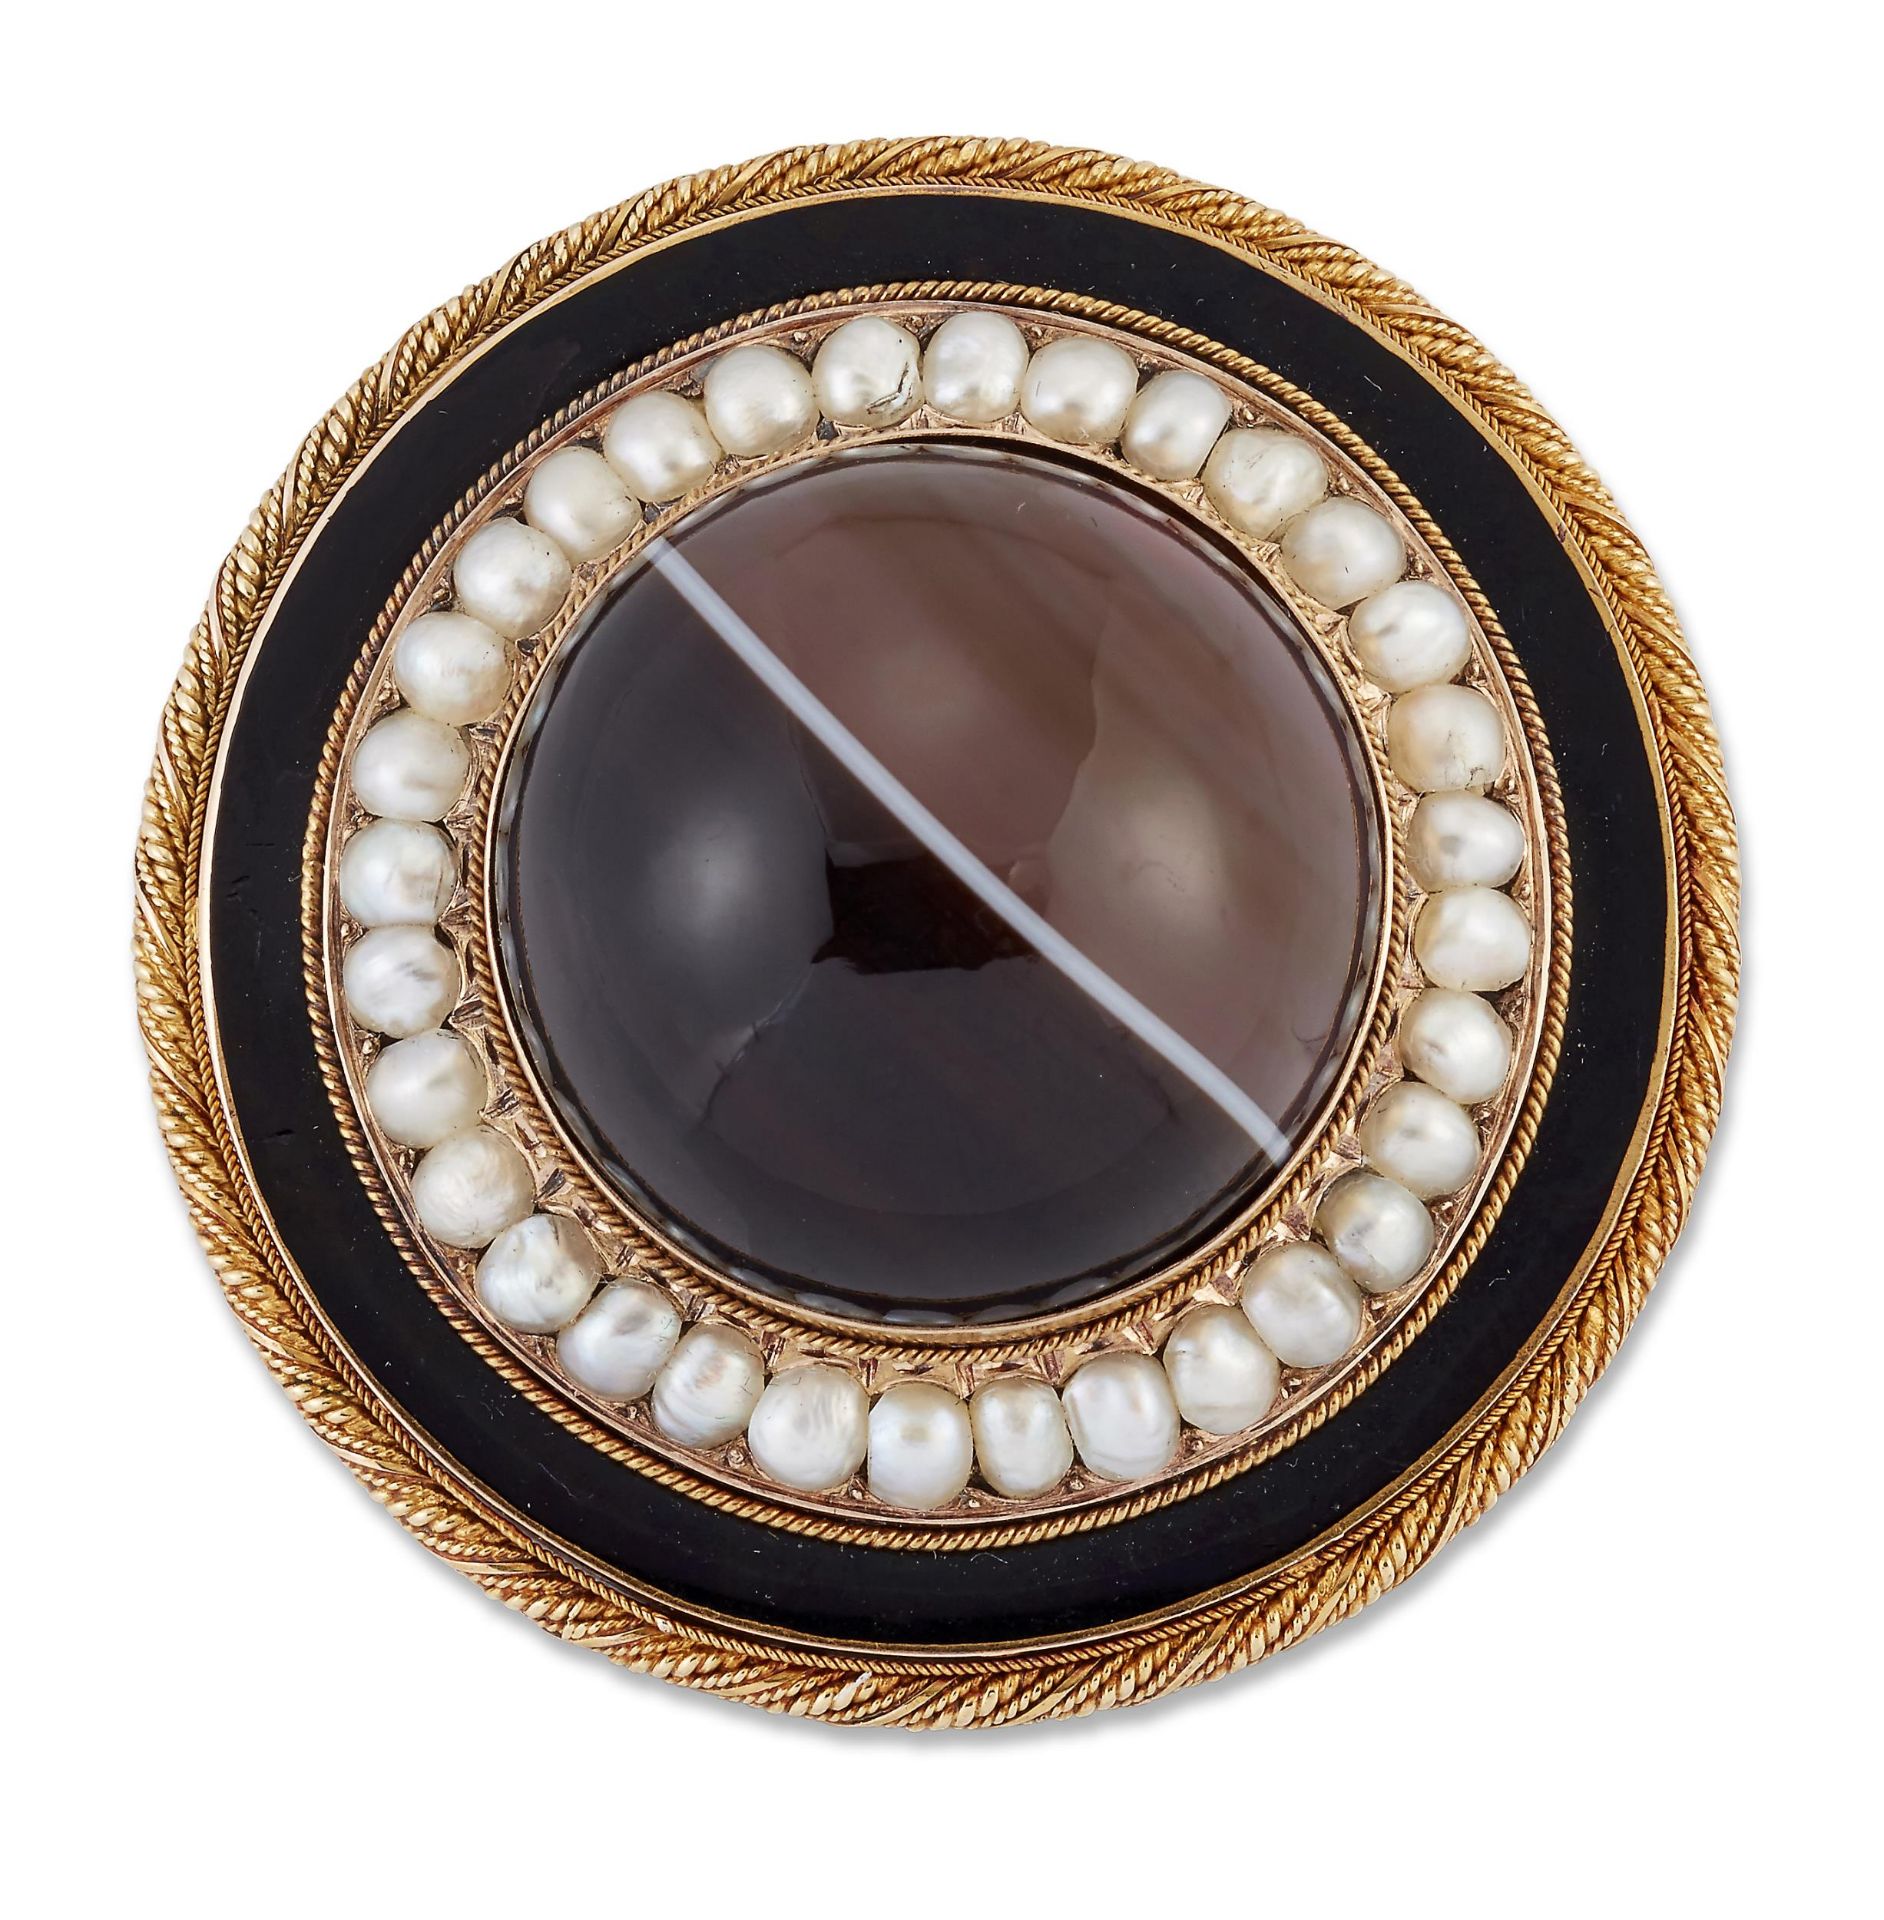 A VICTORIAN BANDED AGATE, SPLIT PEARL AND BLACK ENAMEL MOURNING BROOCH